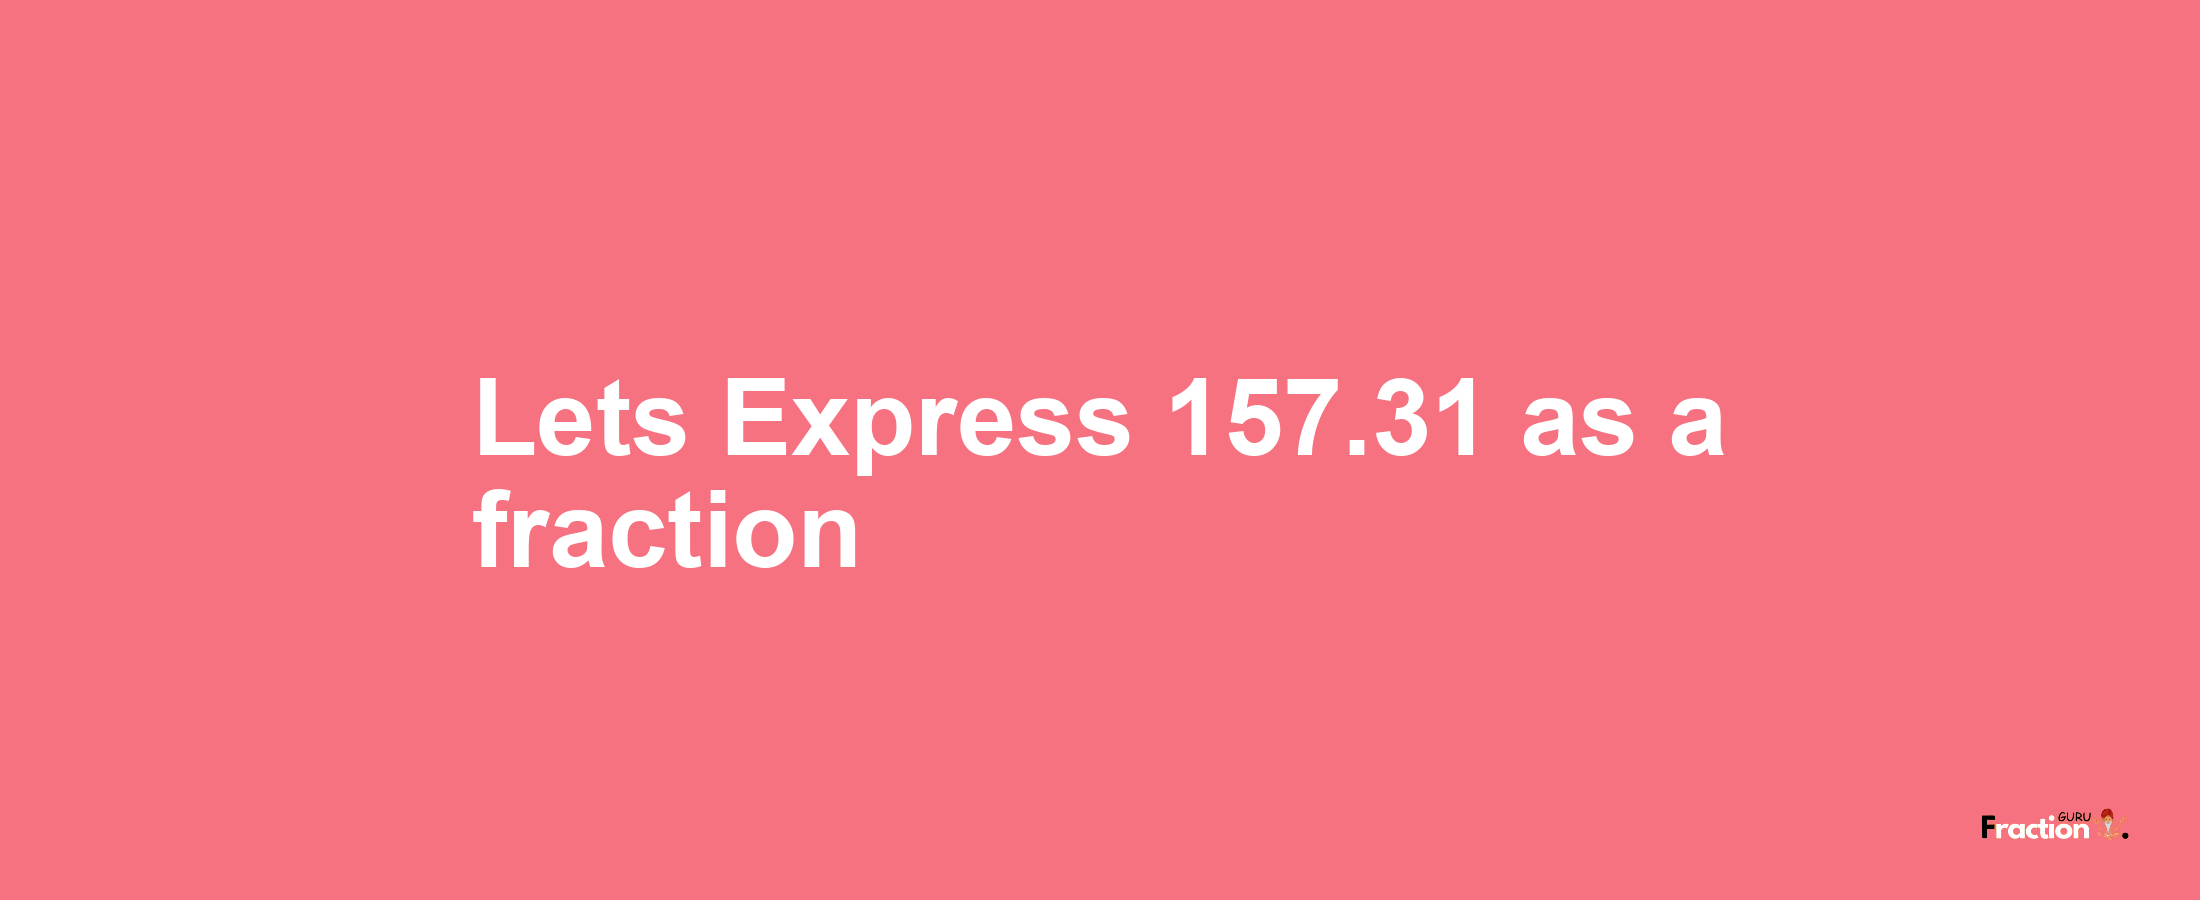 Lets Express 157.31 as afraction